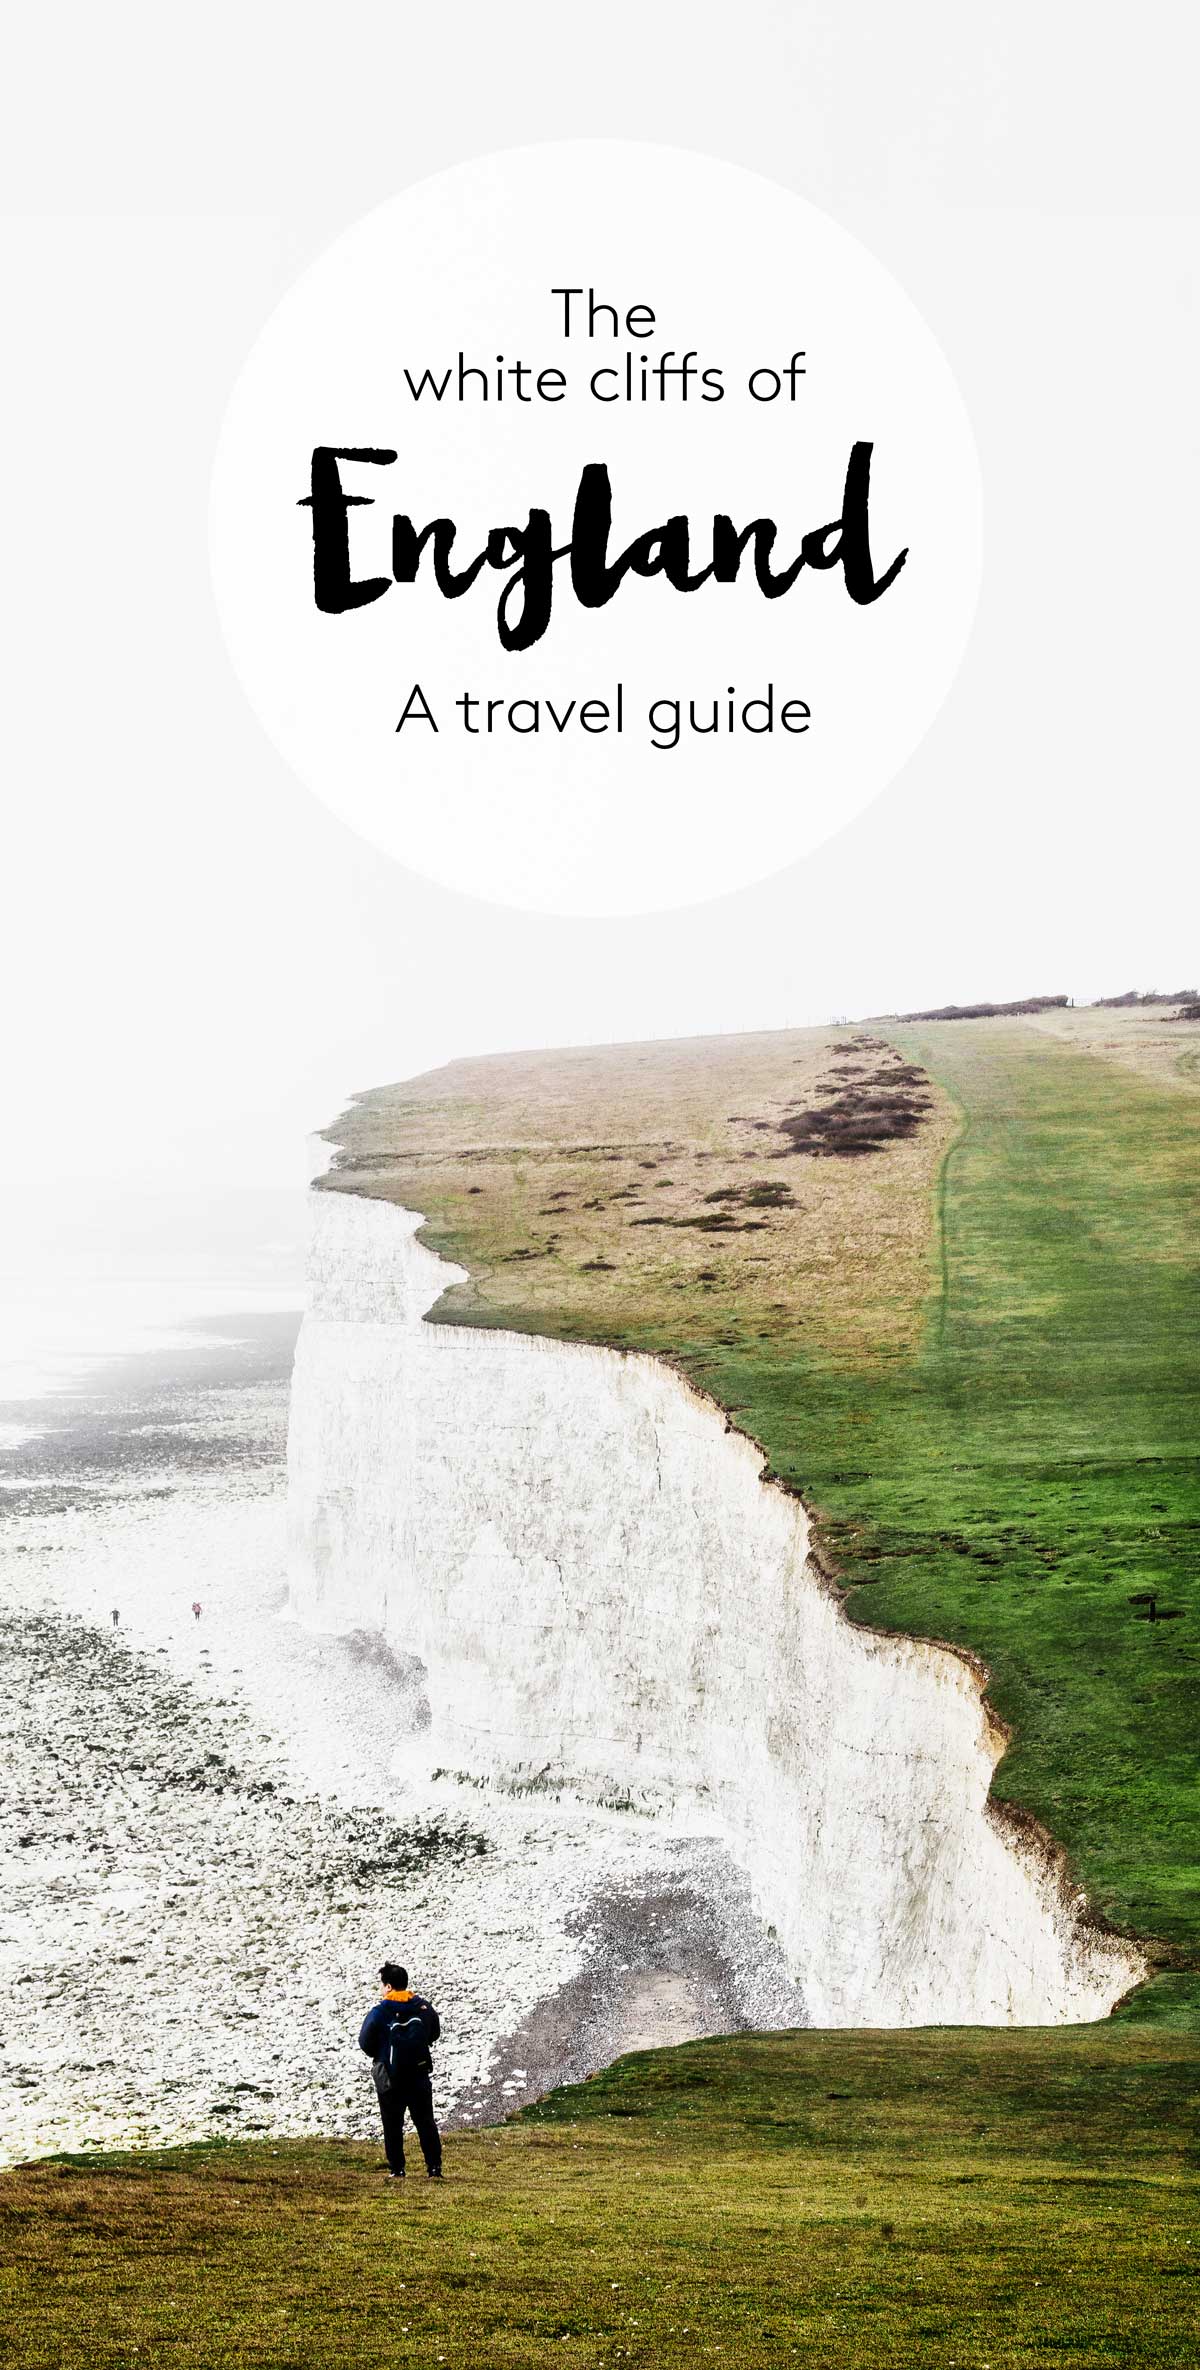 The white cliffs of England – a travel guide to The Seven Sisters